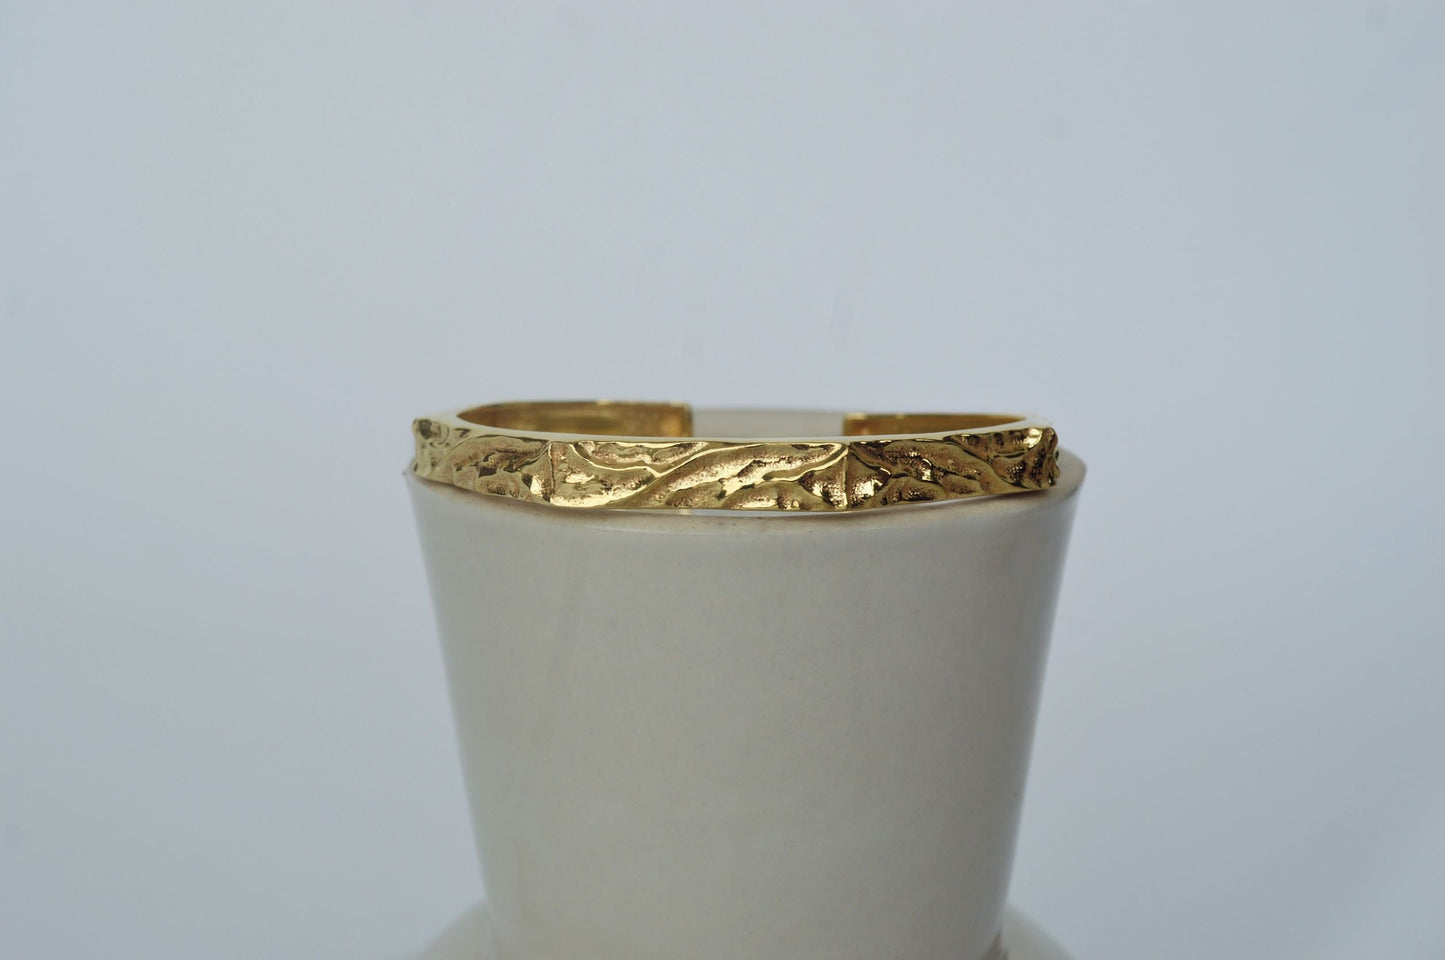 Gold Brass Textured Hexagonal Bracelet at Kamakhyaa by The Loom Art. This item is Add Ons, Bracelets, Brass, Cosmic Dream TLA, Fashion Jewellery, Free Size, Gold, Gold Plated, jewelry, Natural, Textured